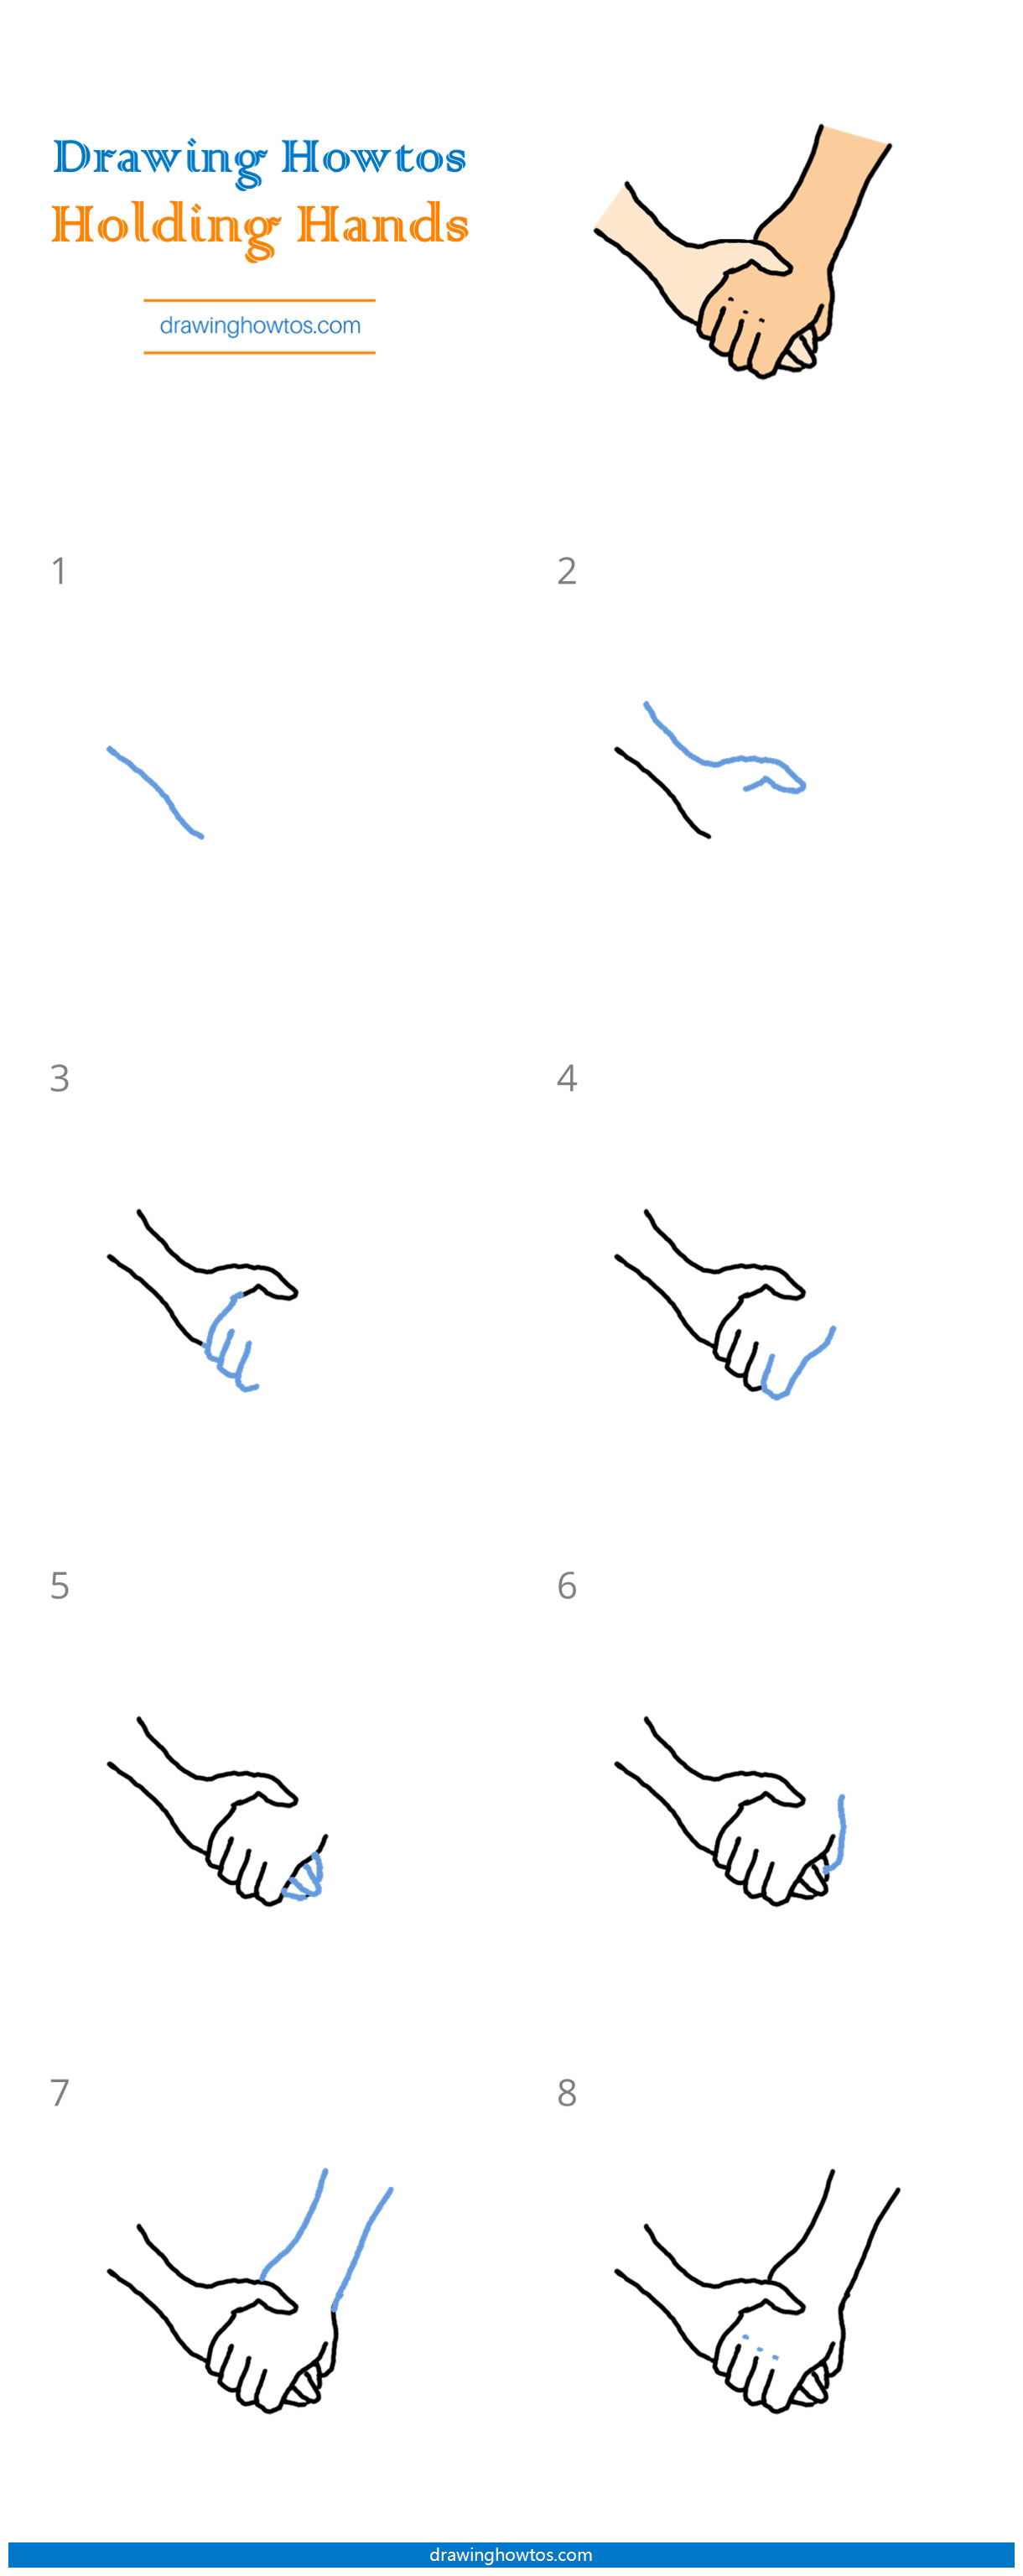 How To Draw Holding Hands Step By Step Easy Begin by sketching the